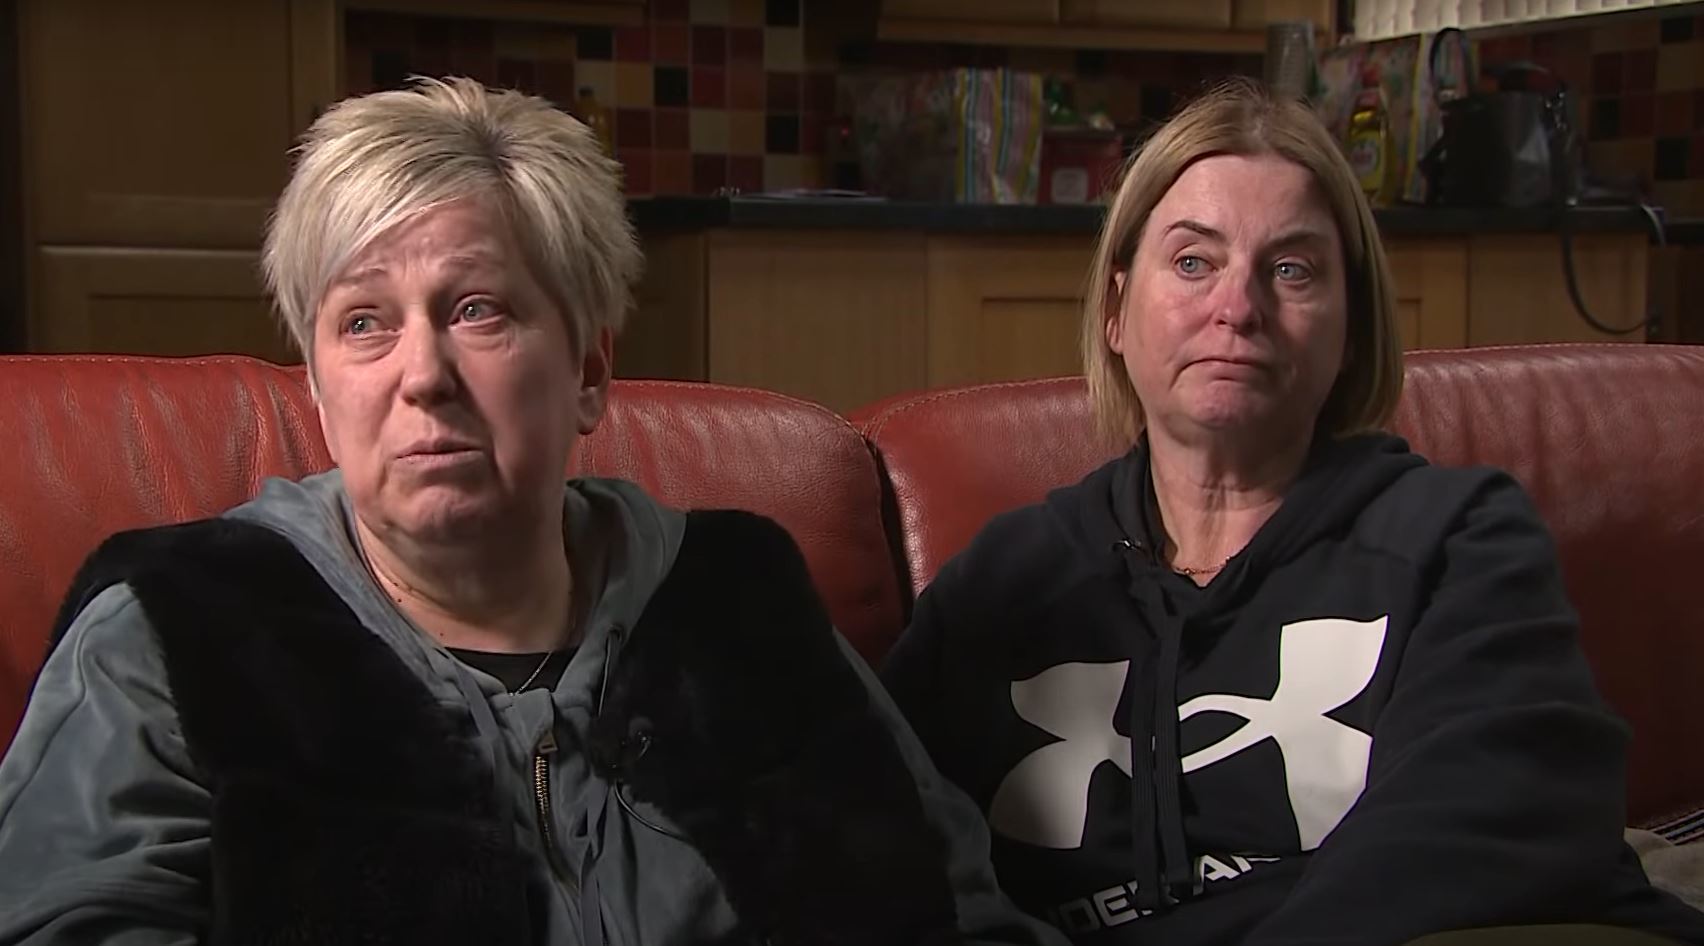 Reece Rodger's mum Glenda Rodger (left) and family friend Melanie Smith say the disappearance is ‘out of character’.
